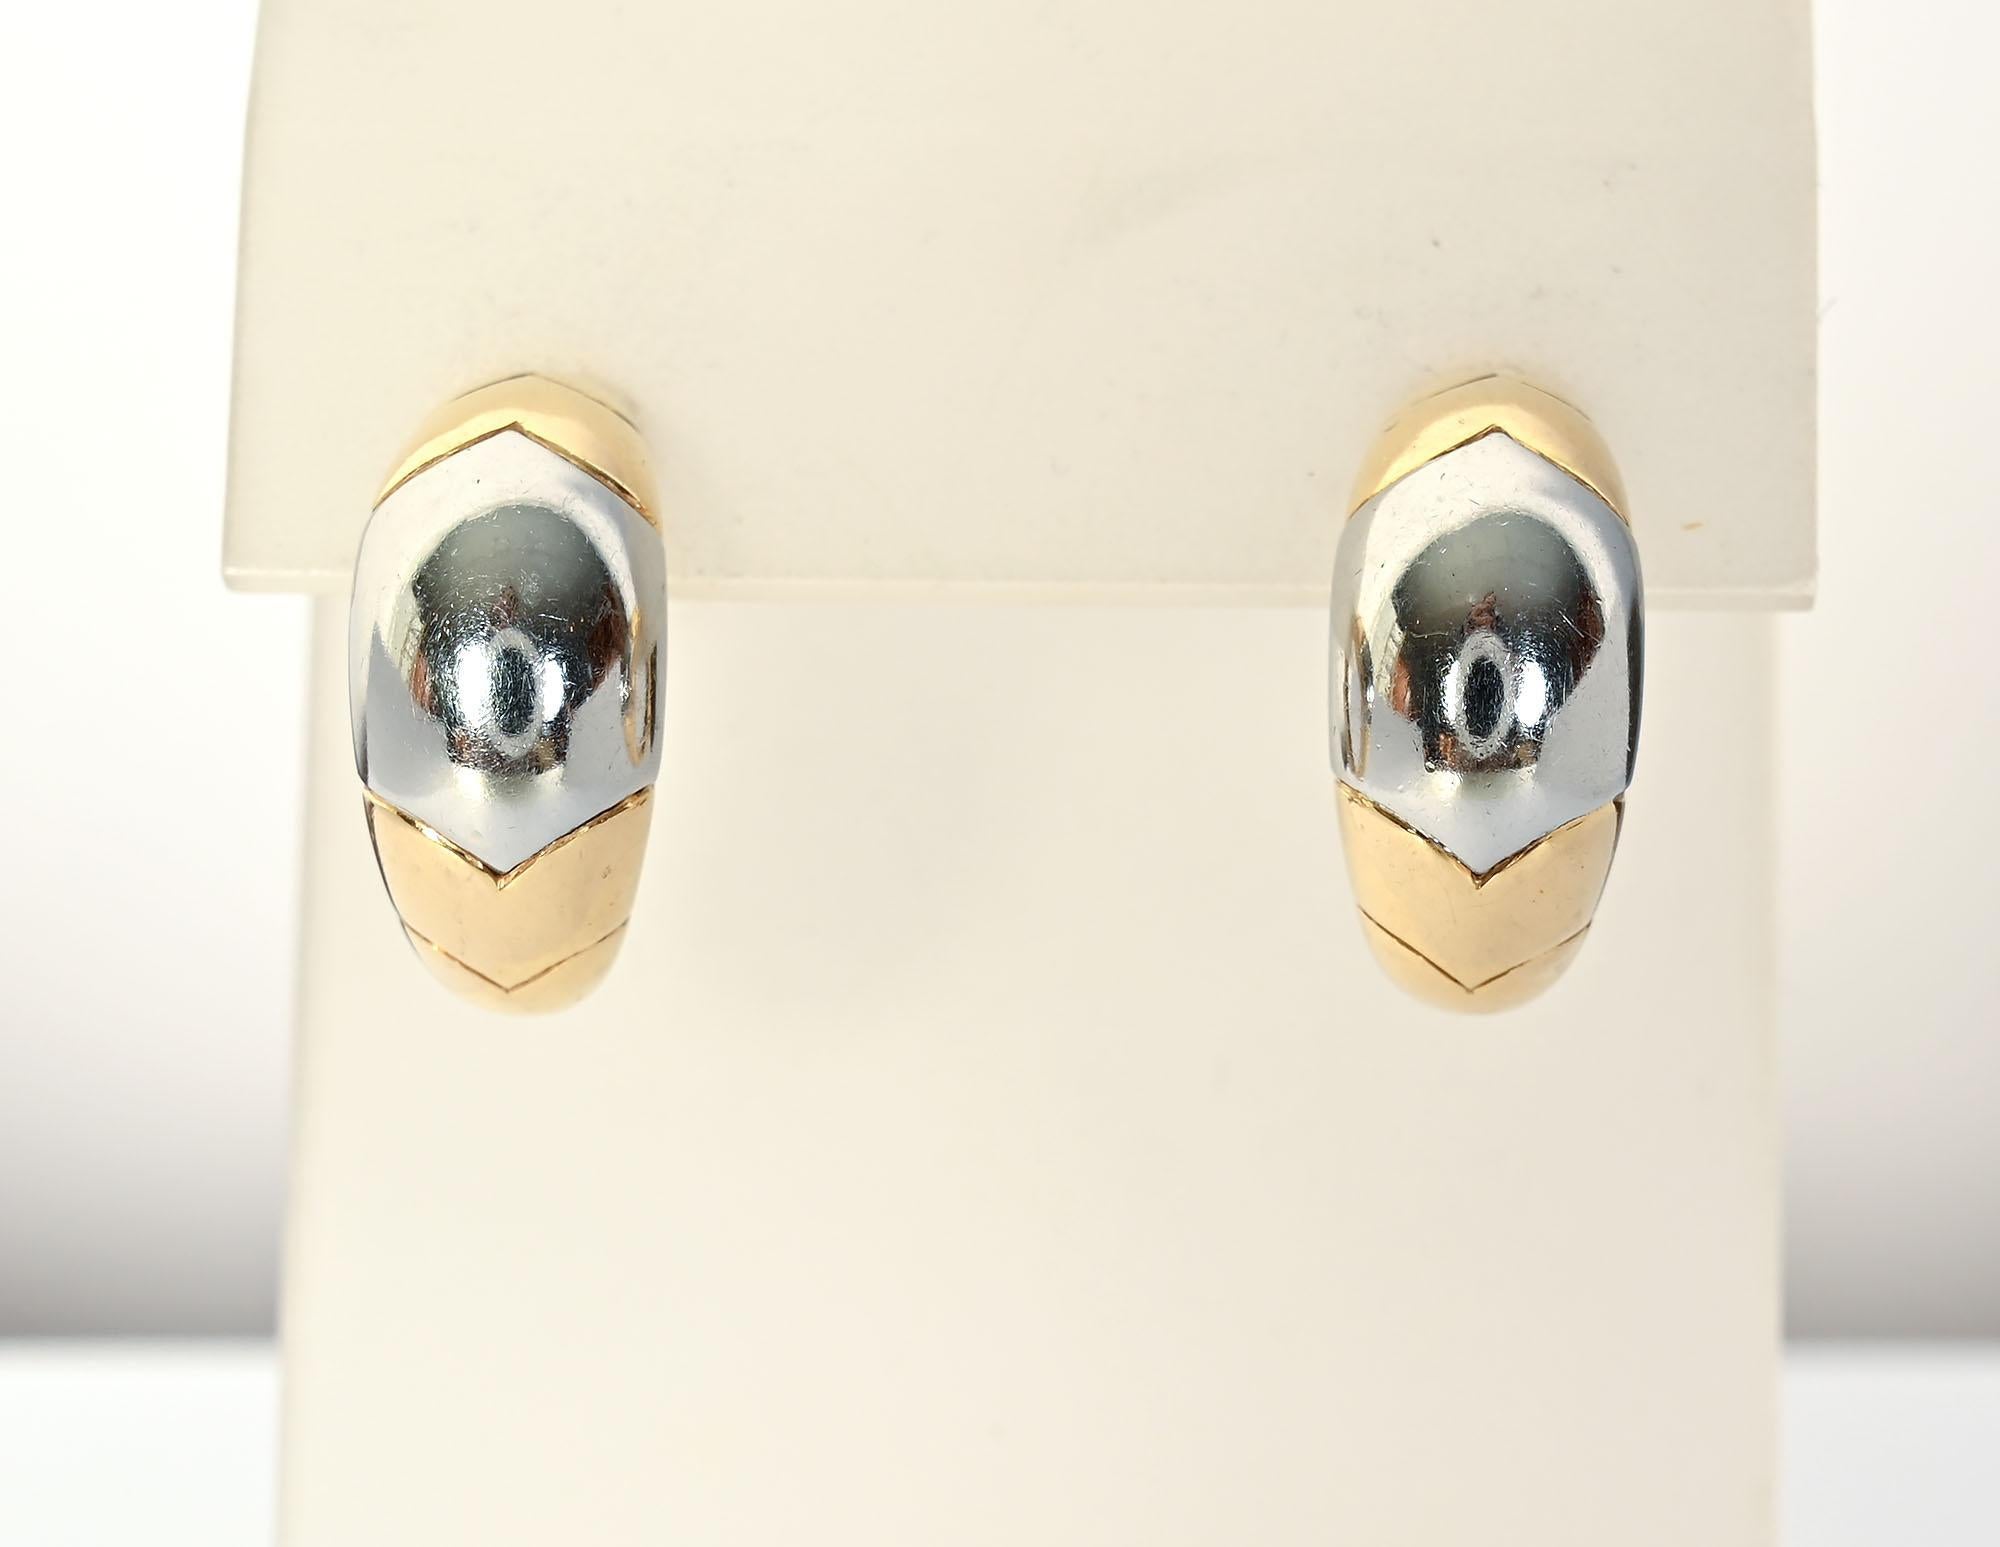 Tailored half hoop earrings by Bulgari. Top and bottom are yellow gold with white in the center. The earrings have the curved V design often used by Bulgari. The earrings are half an inch wide and three quarters of an inch long. These earrings are